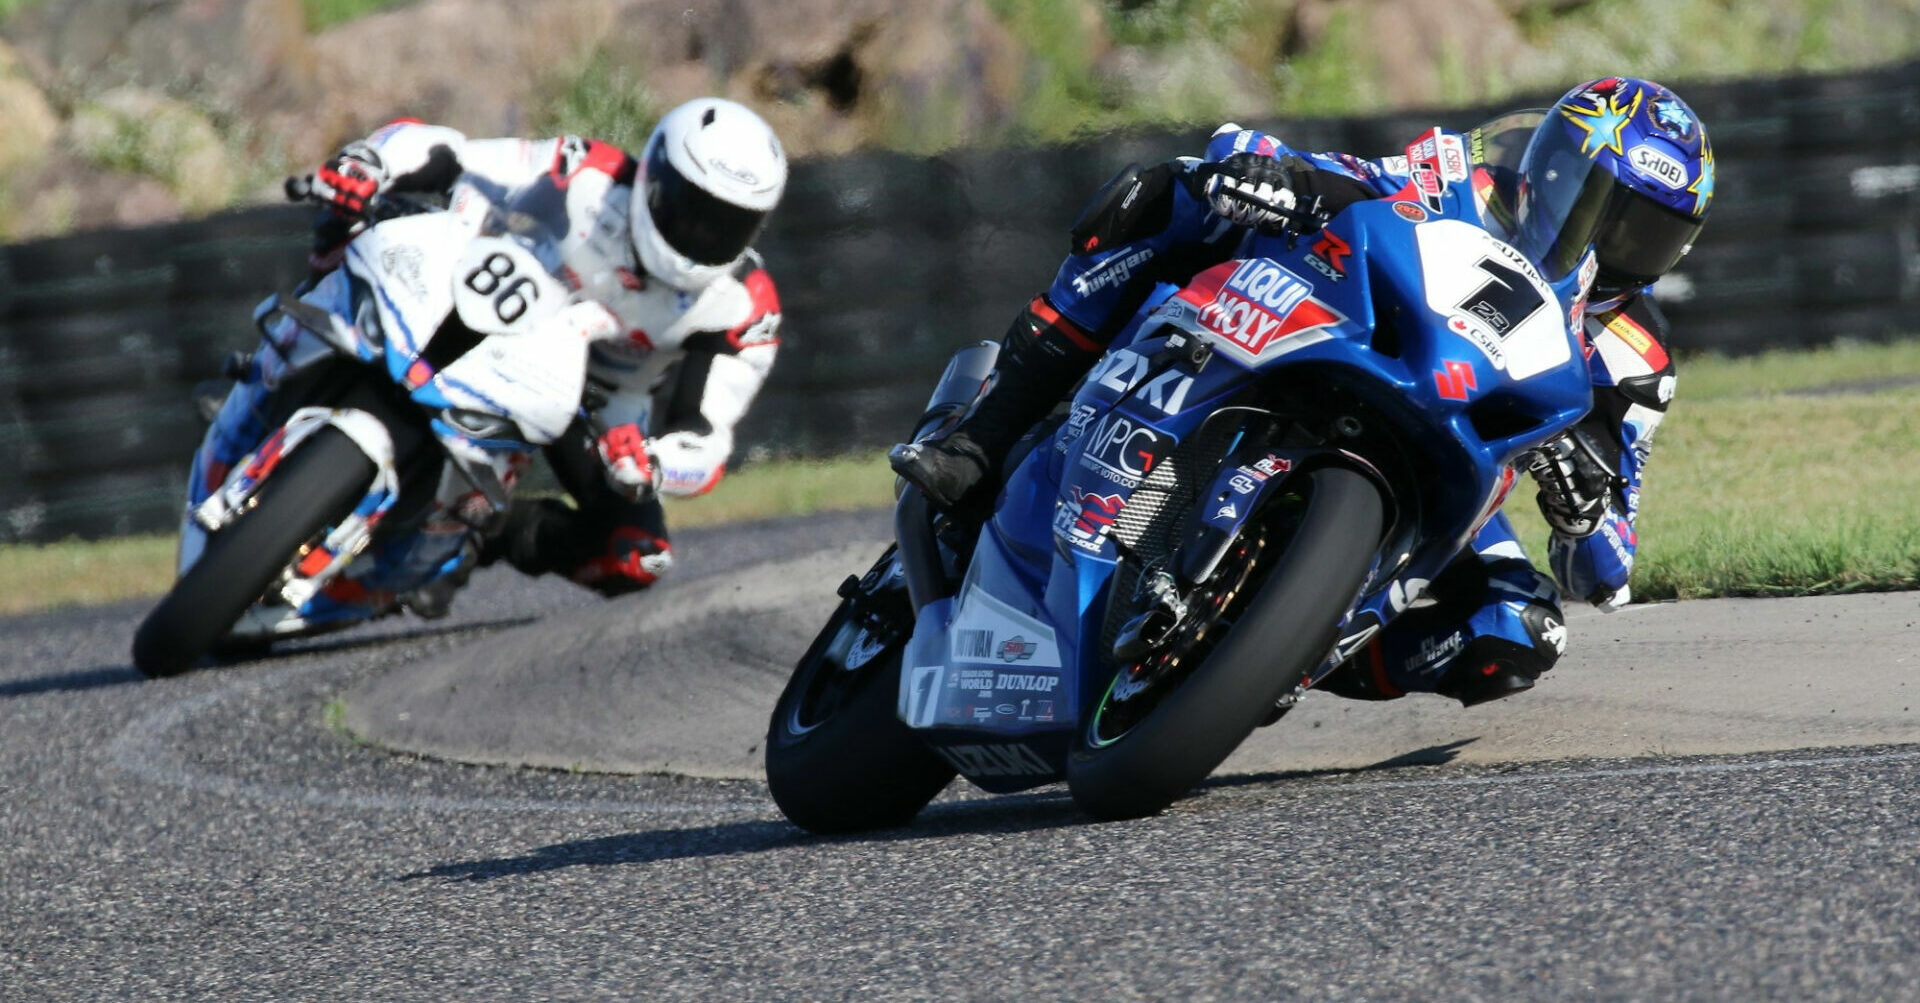 Alex Dumas (1) leading Ben Young (86) during Canadian Superbike Race One at Calabogie Motorsports Park. Photo by Rob O'Brien, courtesy CSBK/PMP.